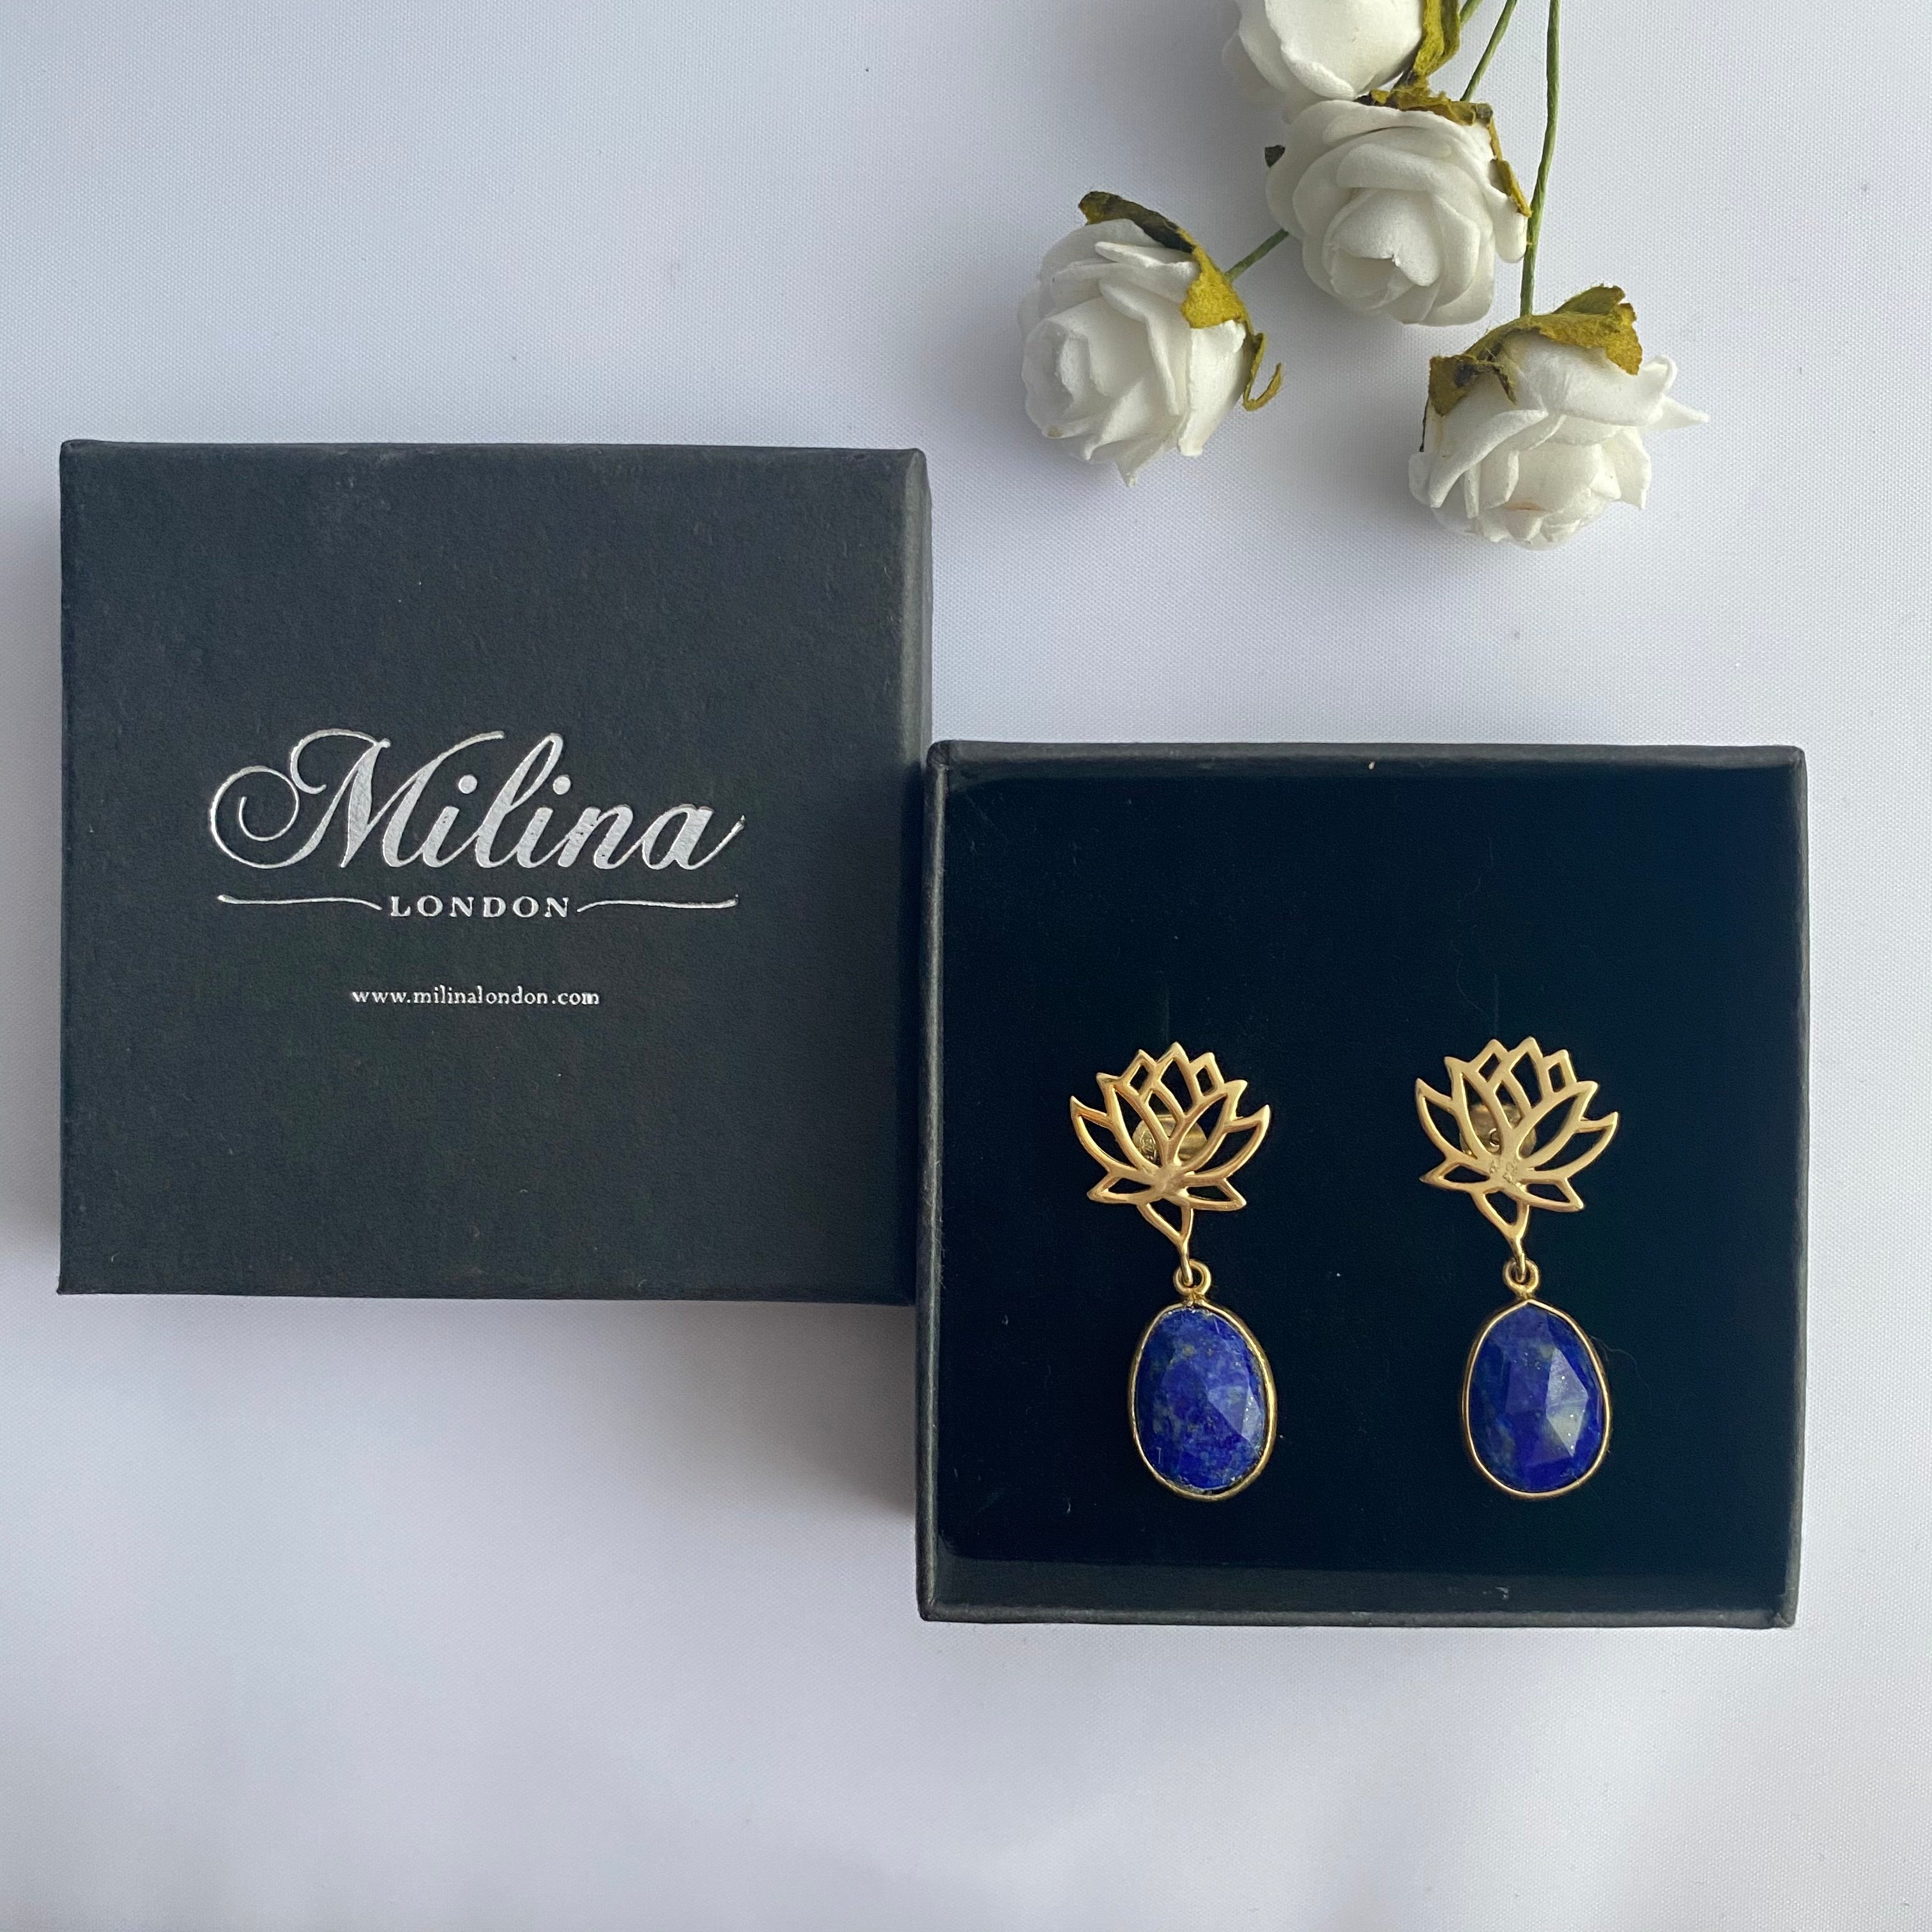 Lotus Earrings in Gold Plated Sterling Silver with a Lapis Lazuli Gemstone Drop